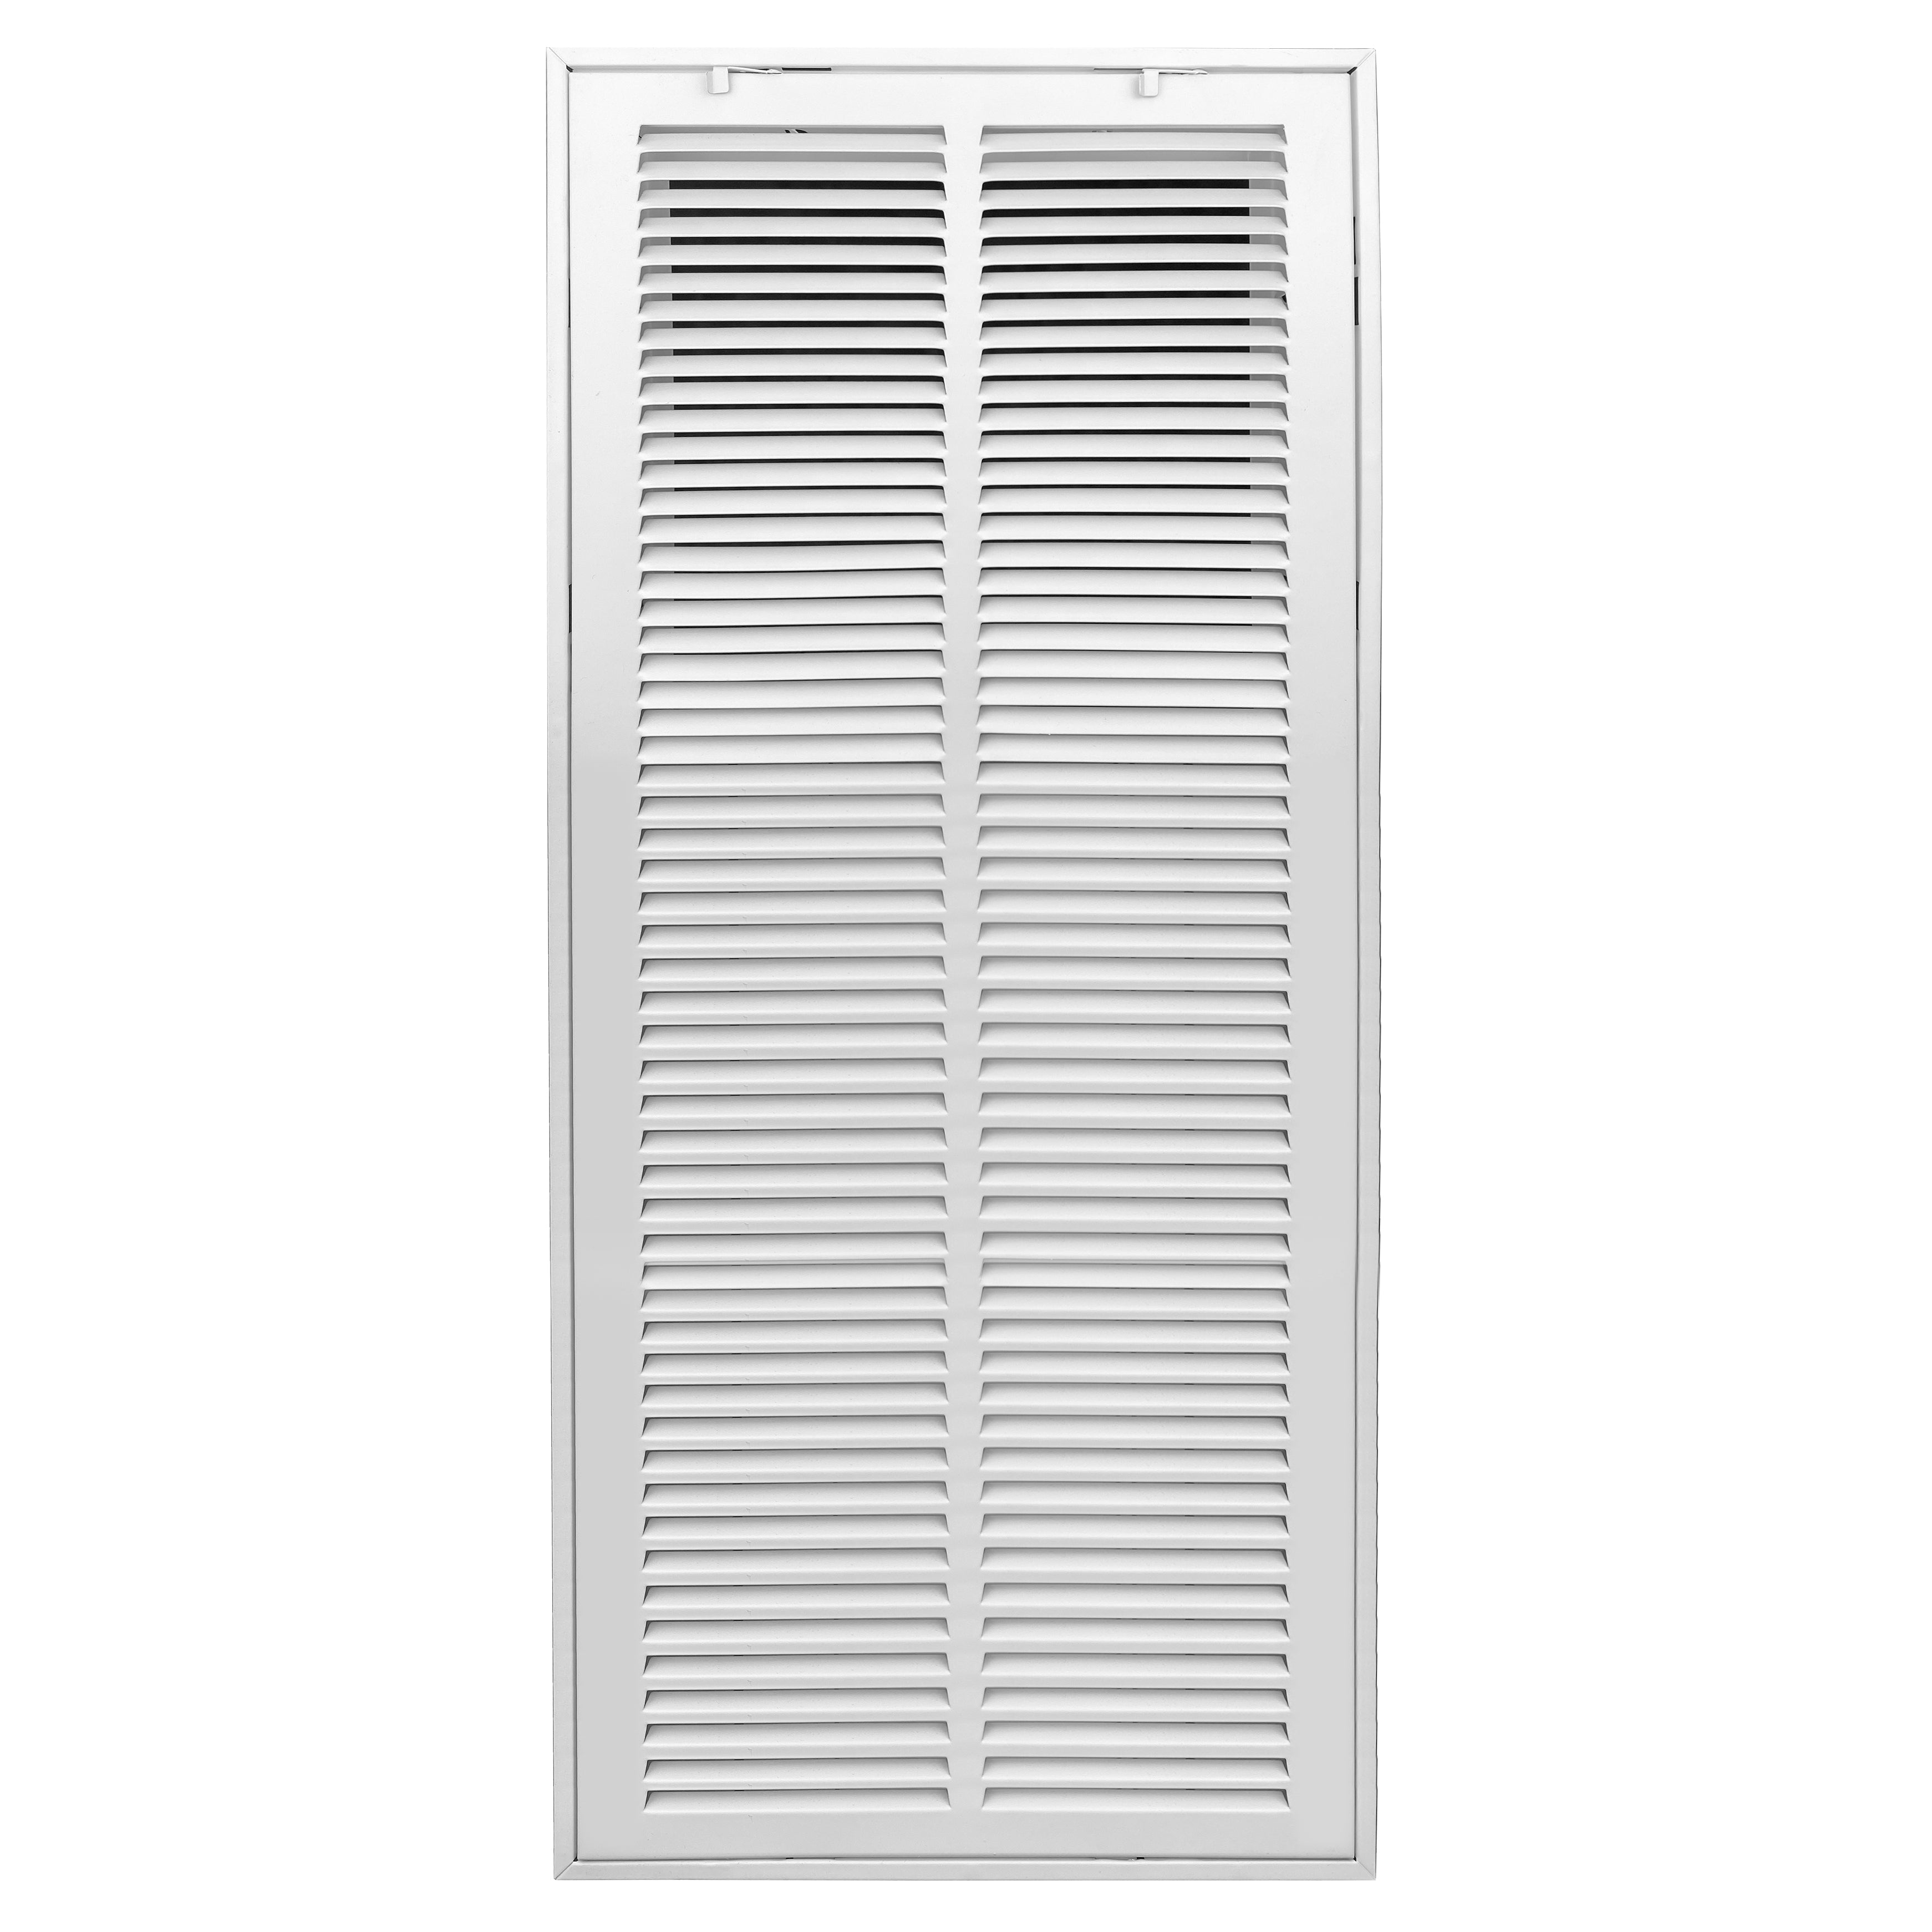 airgrilles 14" x 30" duct opening  -  steel return air filter grille for sidewall and ceiling hnd-rafg1-wh-14x30 752505979663 - 1